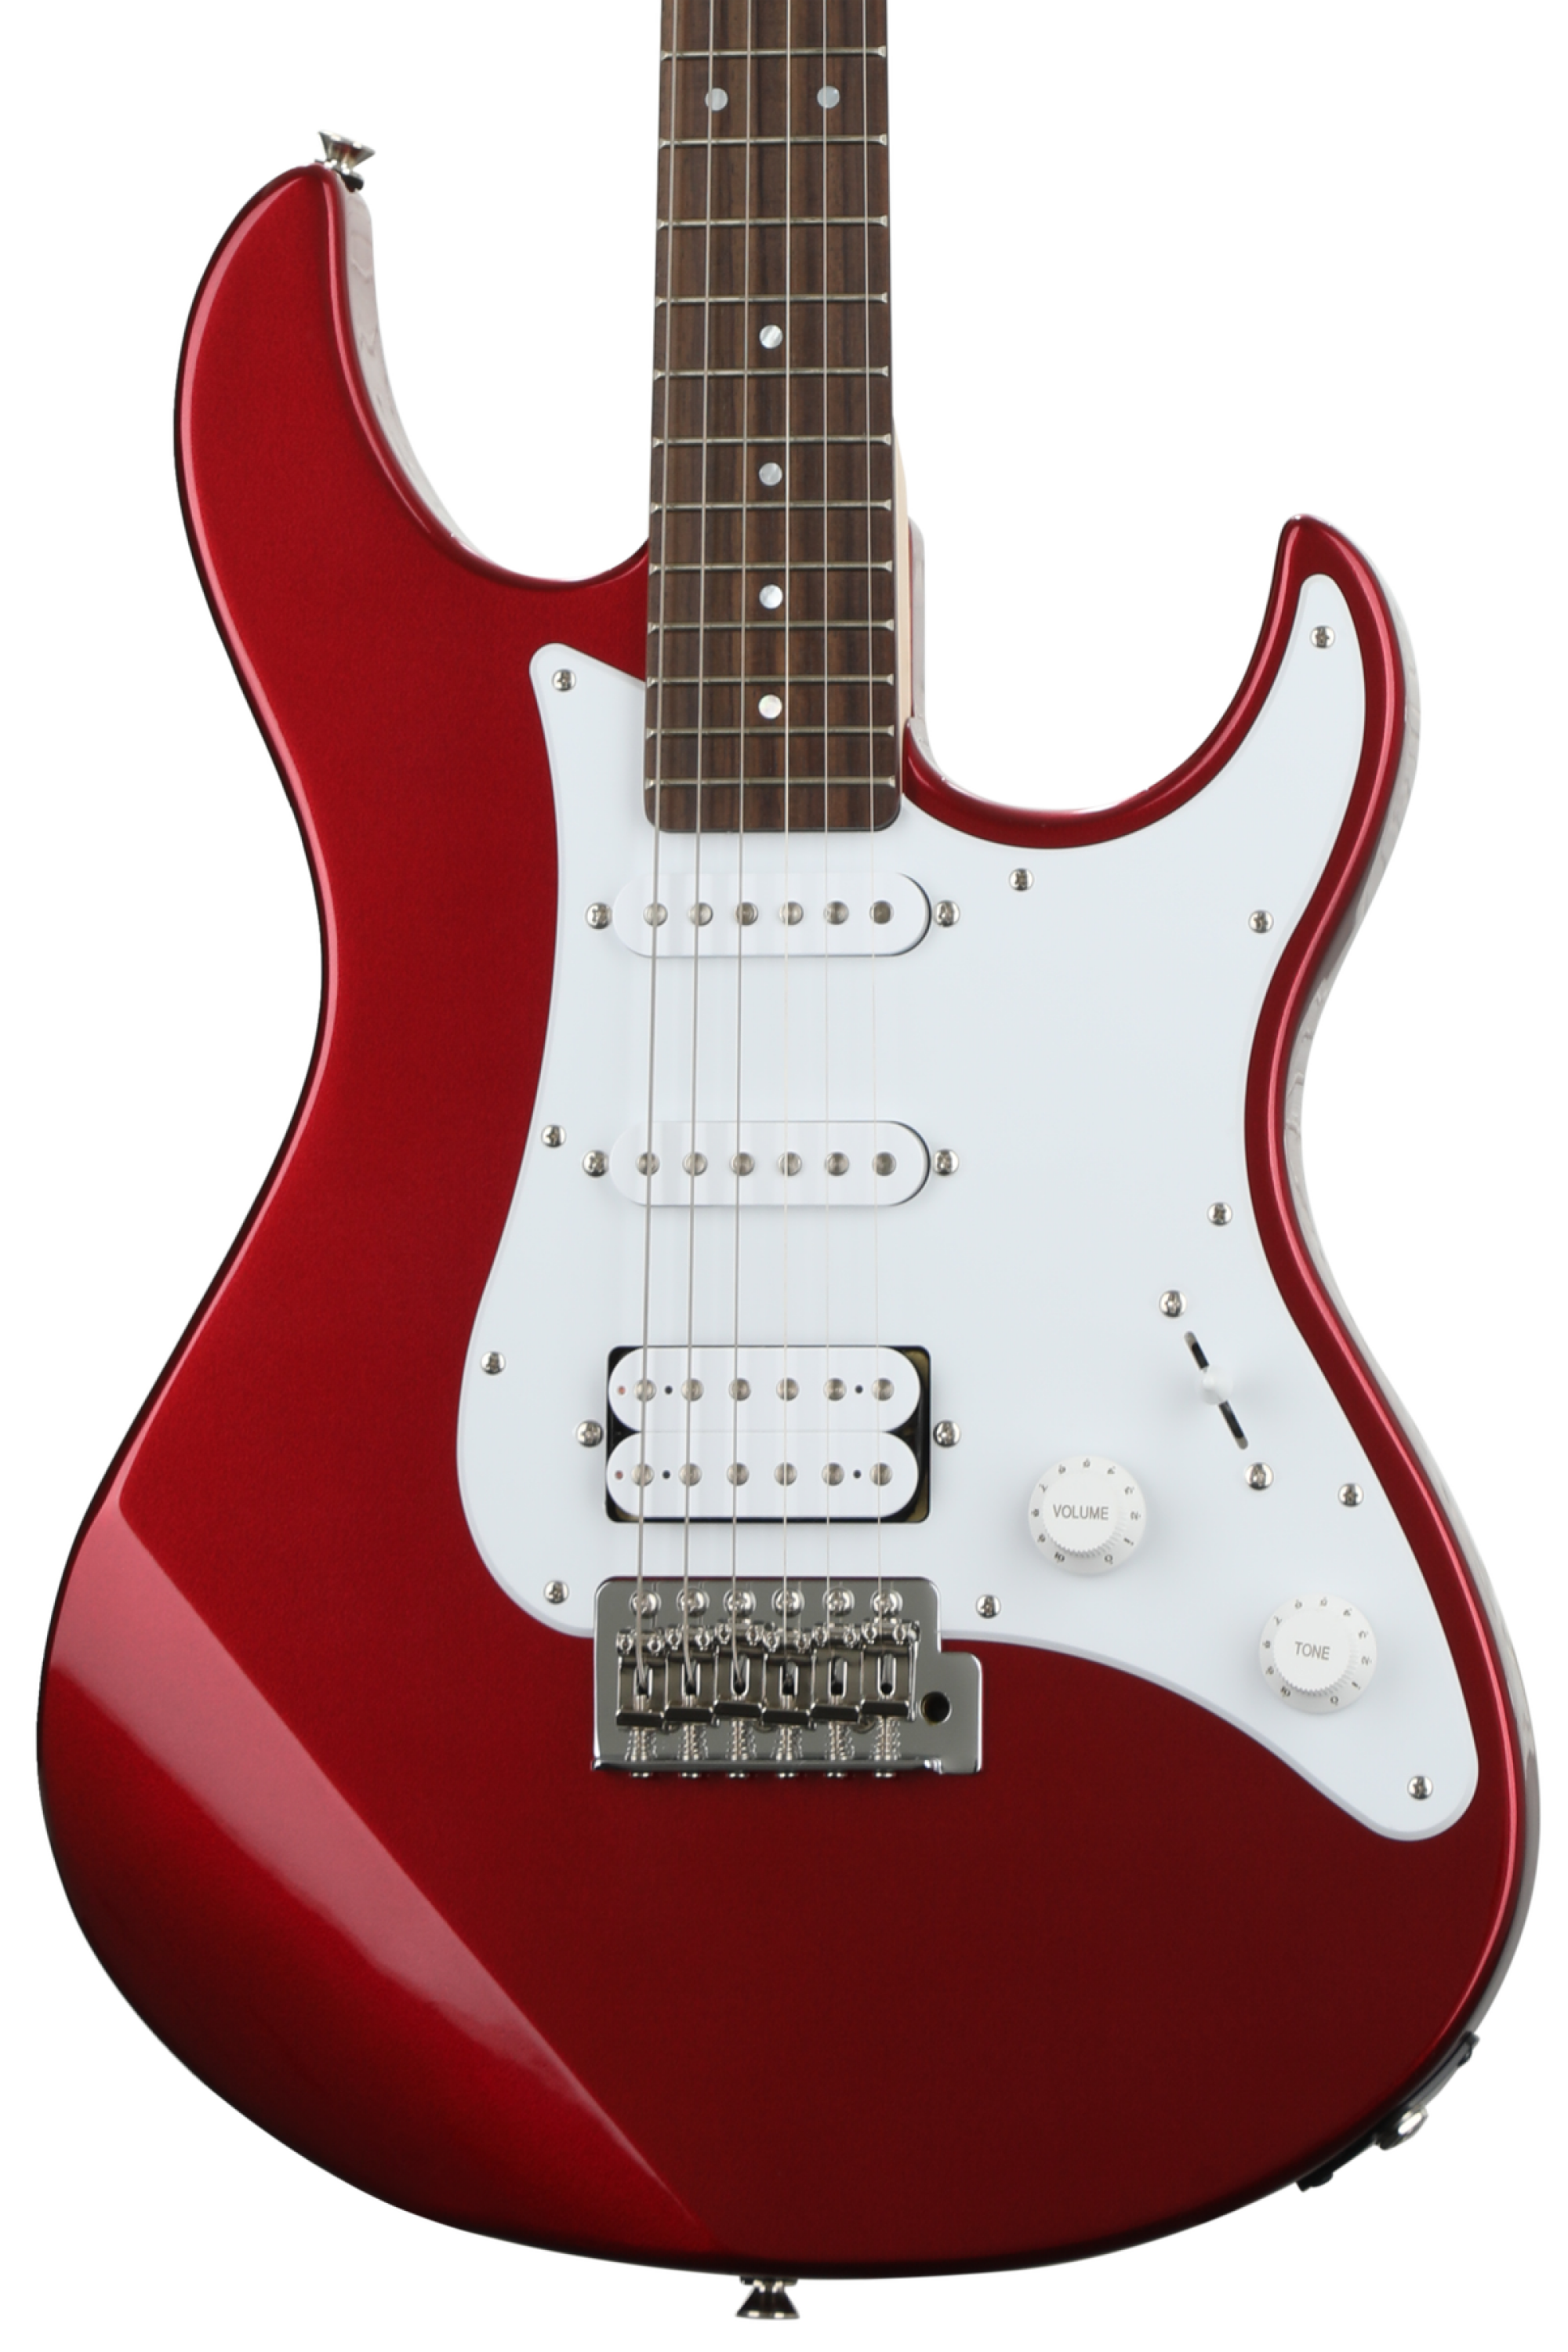 Yamaha PAC012 Pacifica Electric Guitar - Metallic Red | Sweetwater